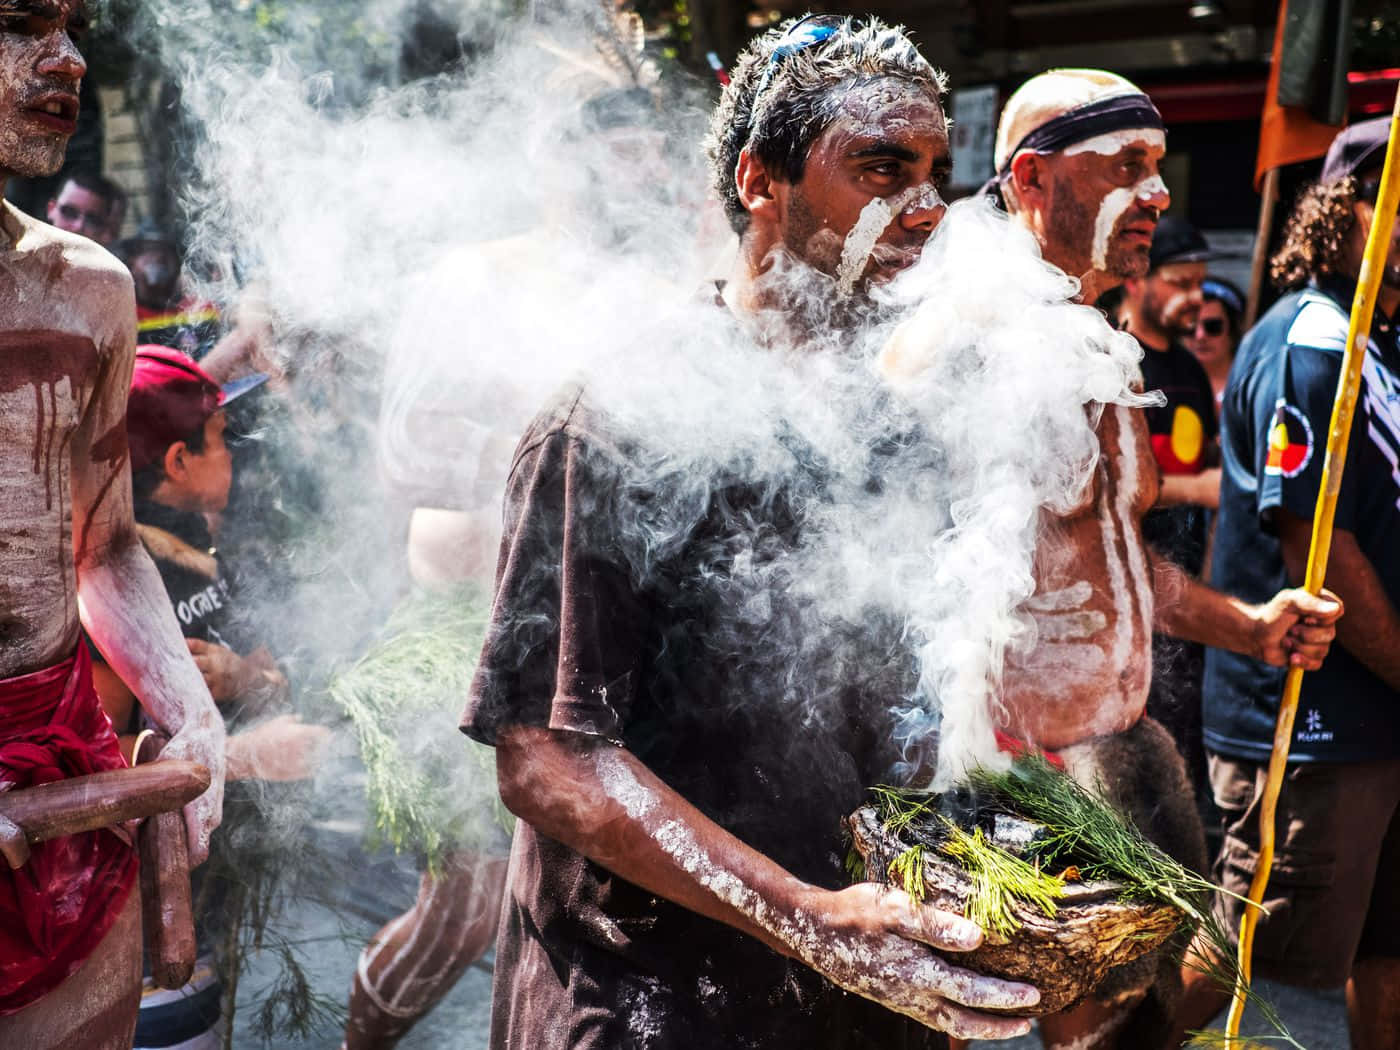 A Group Of People With Paint On Their Faces And Smoke